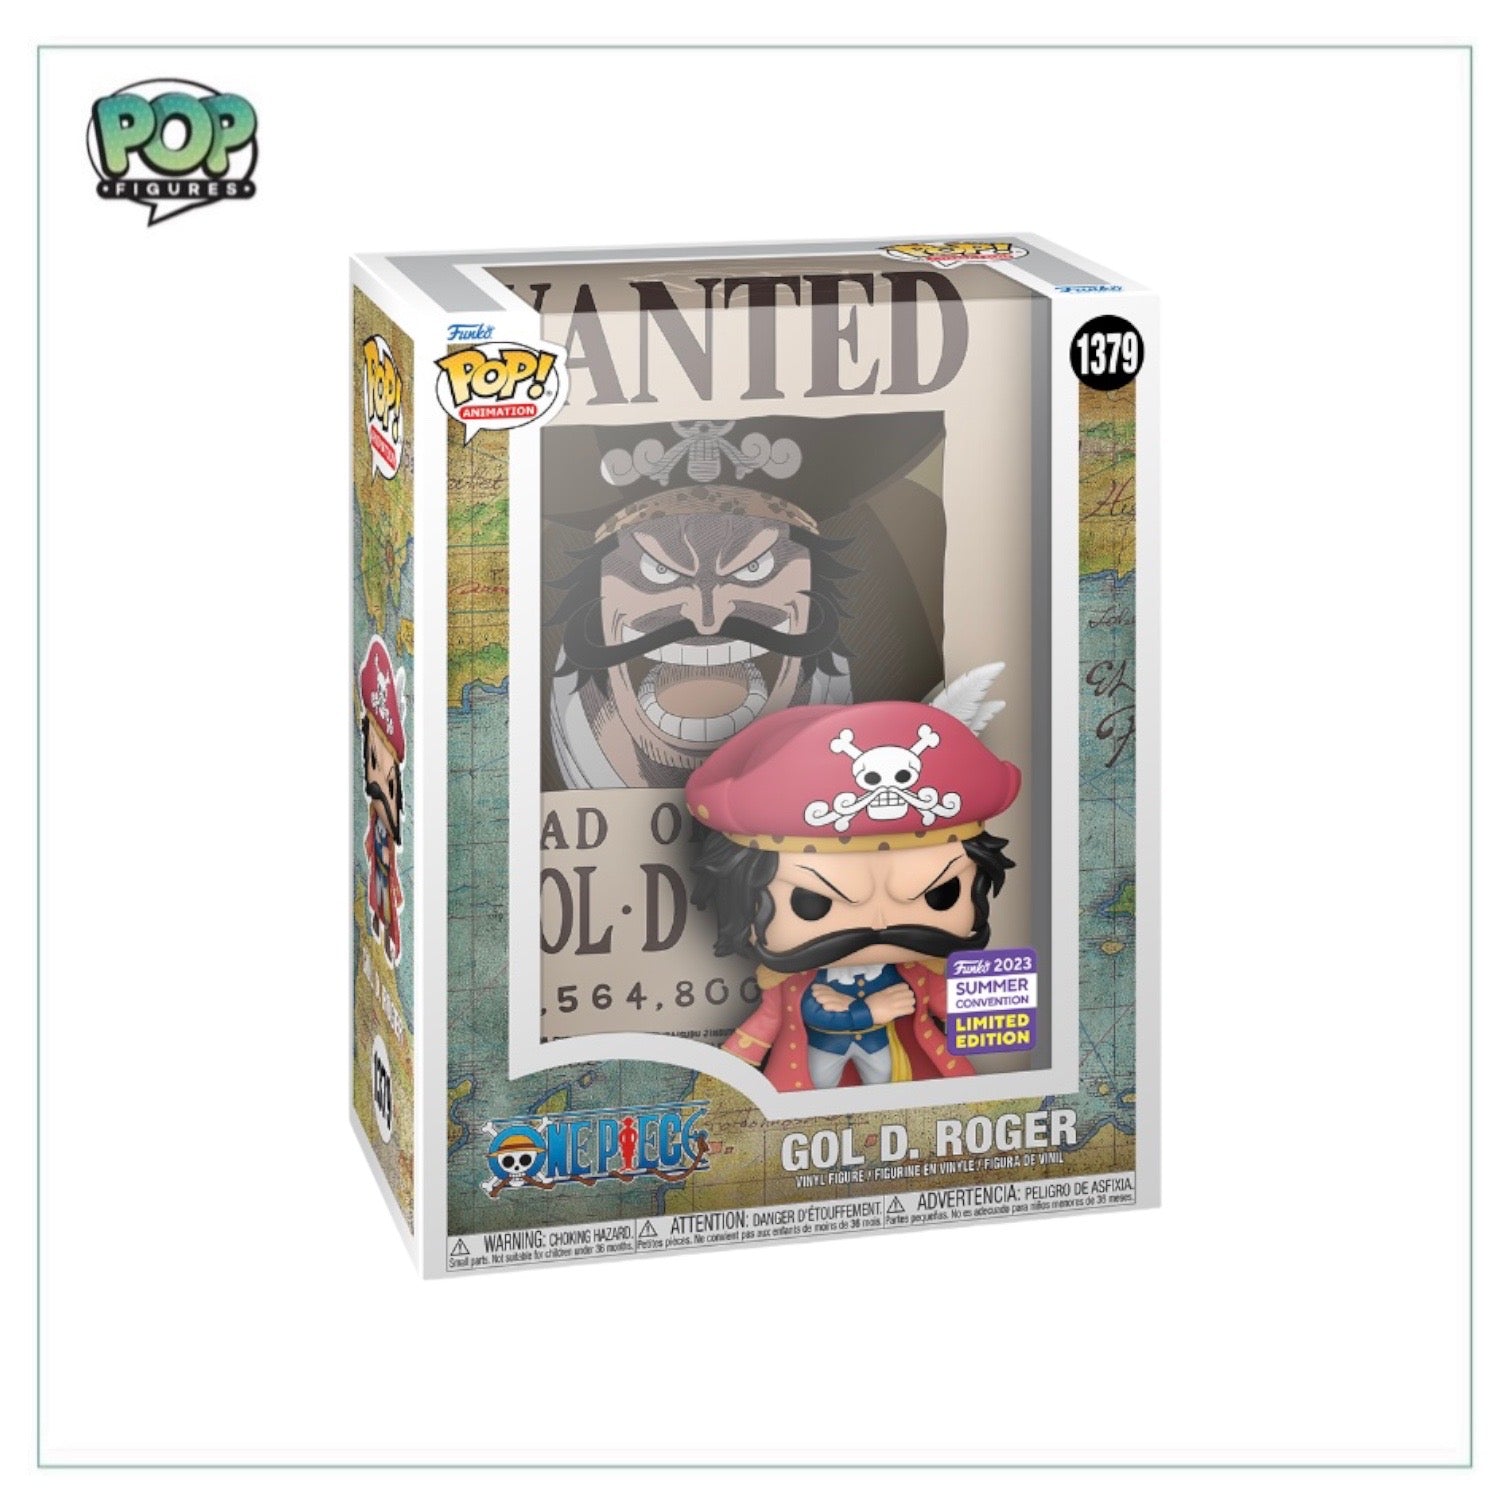 Gol D. Roger #1379 (Wanted) Funko Pop Poster! - One Piece - SDCC 2023 Shared Exclusive